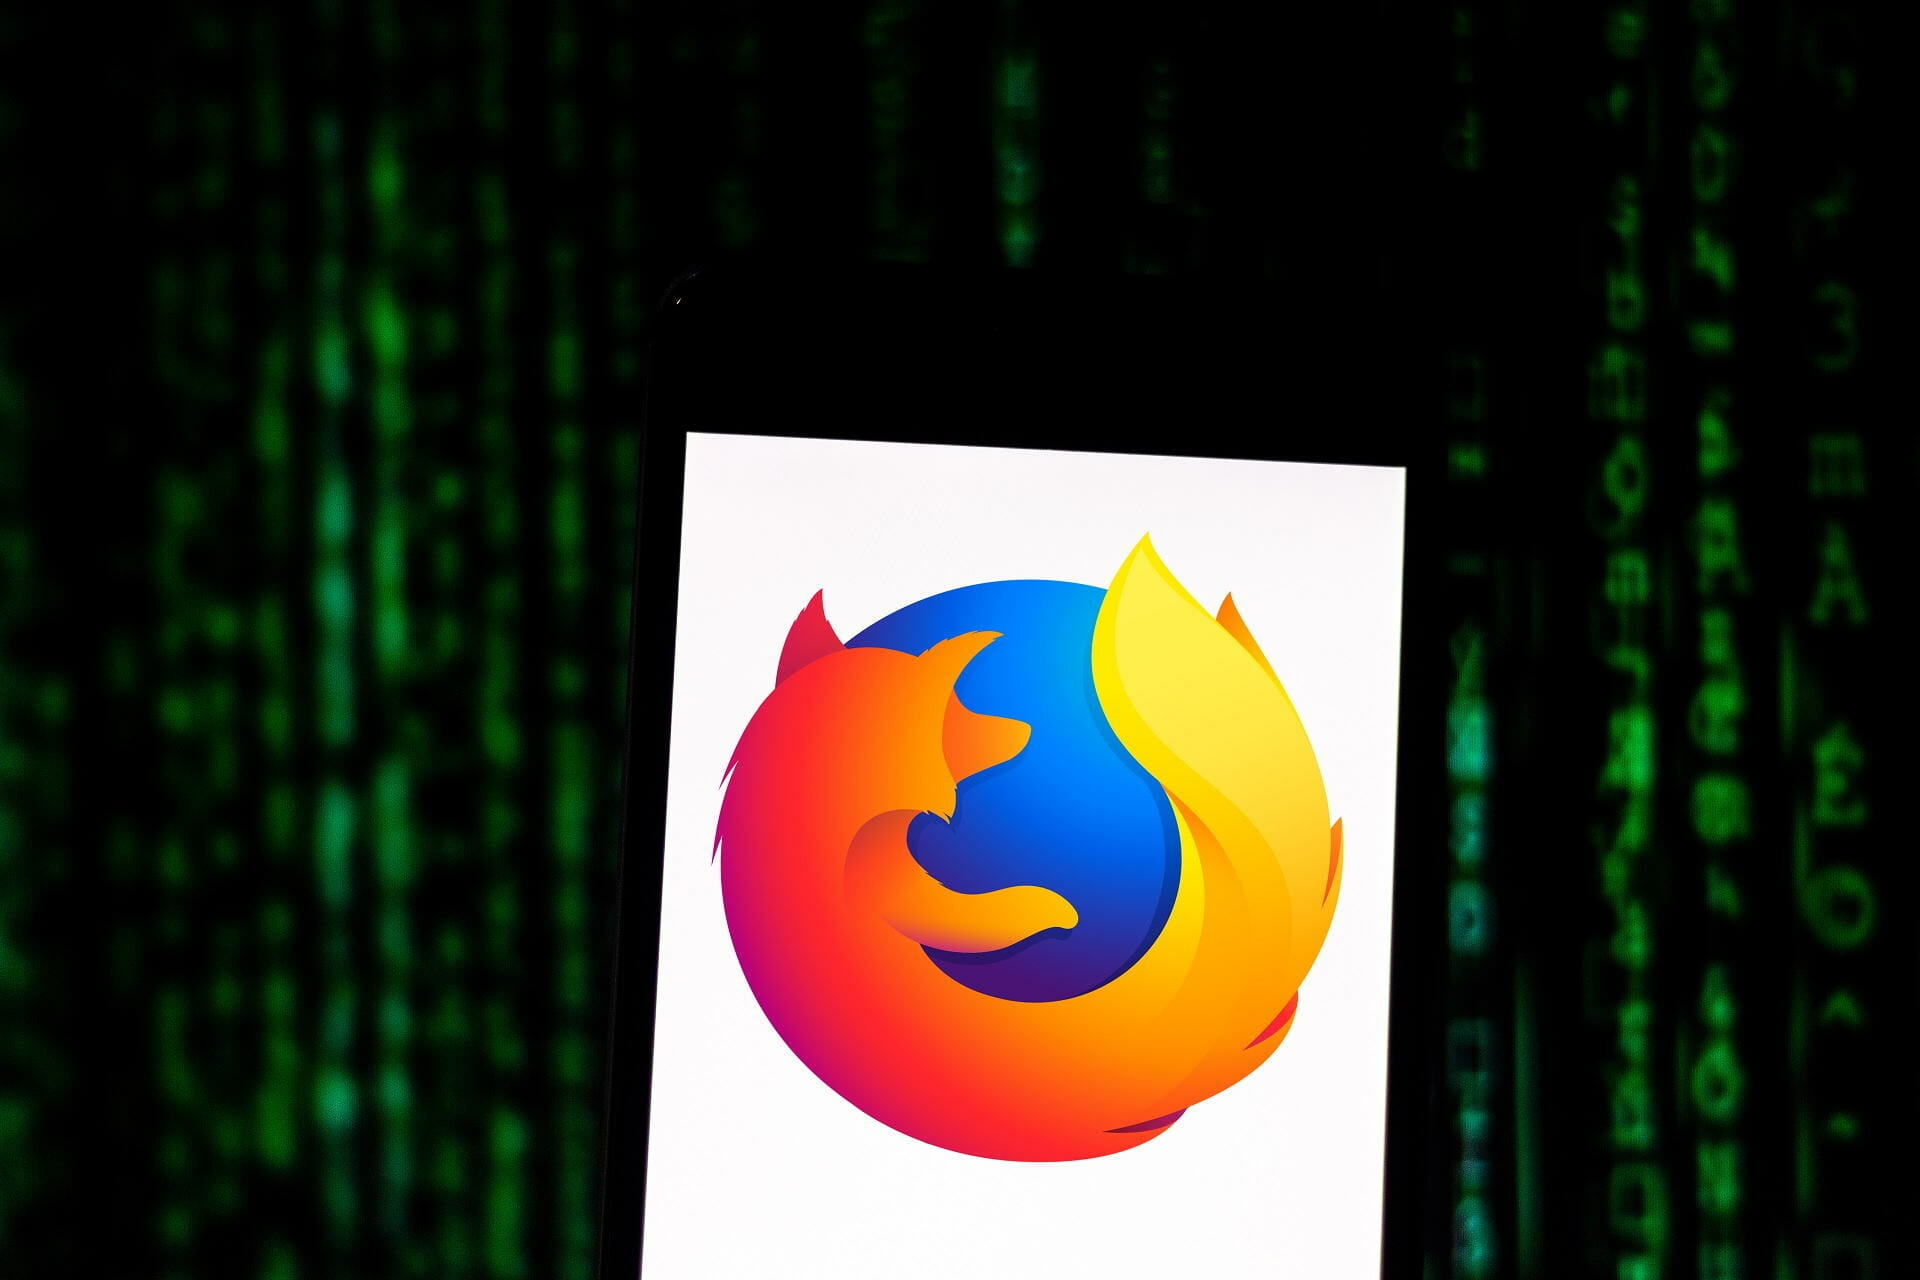 Fix Your system doesn't meet the requirements to run Firefox